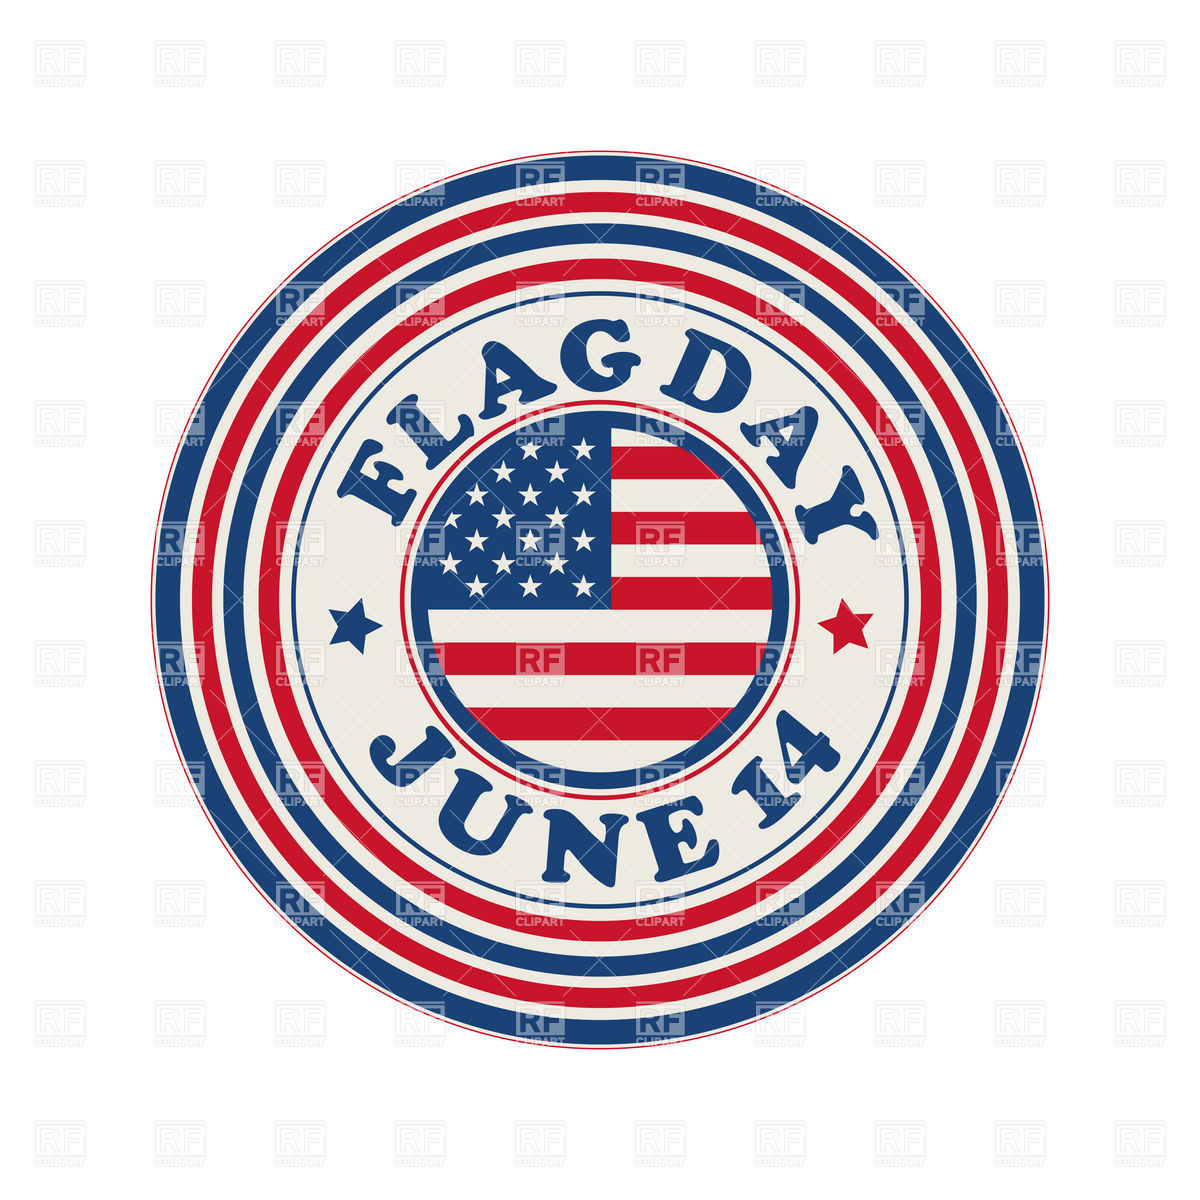 Flag Day Celebration Stamp 6521 Download Royalty Free Vector Clipart